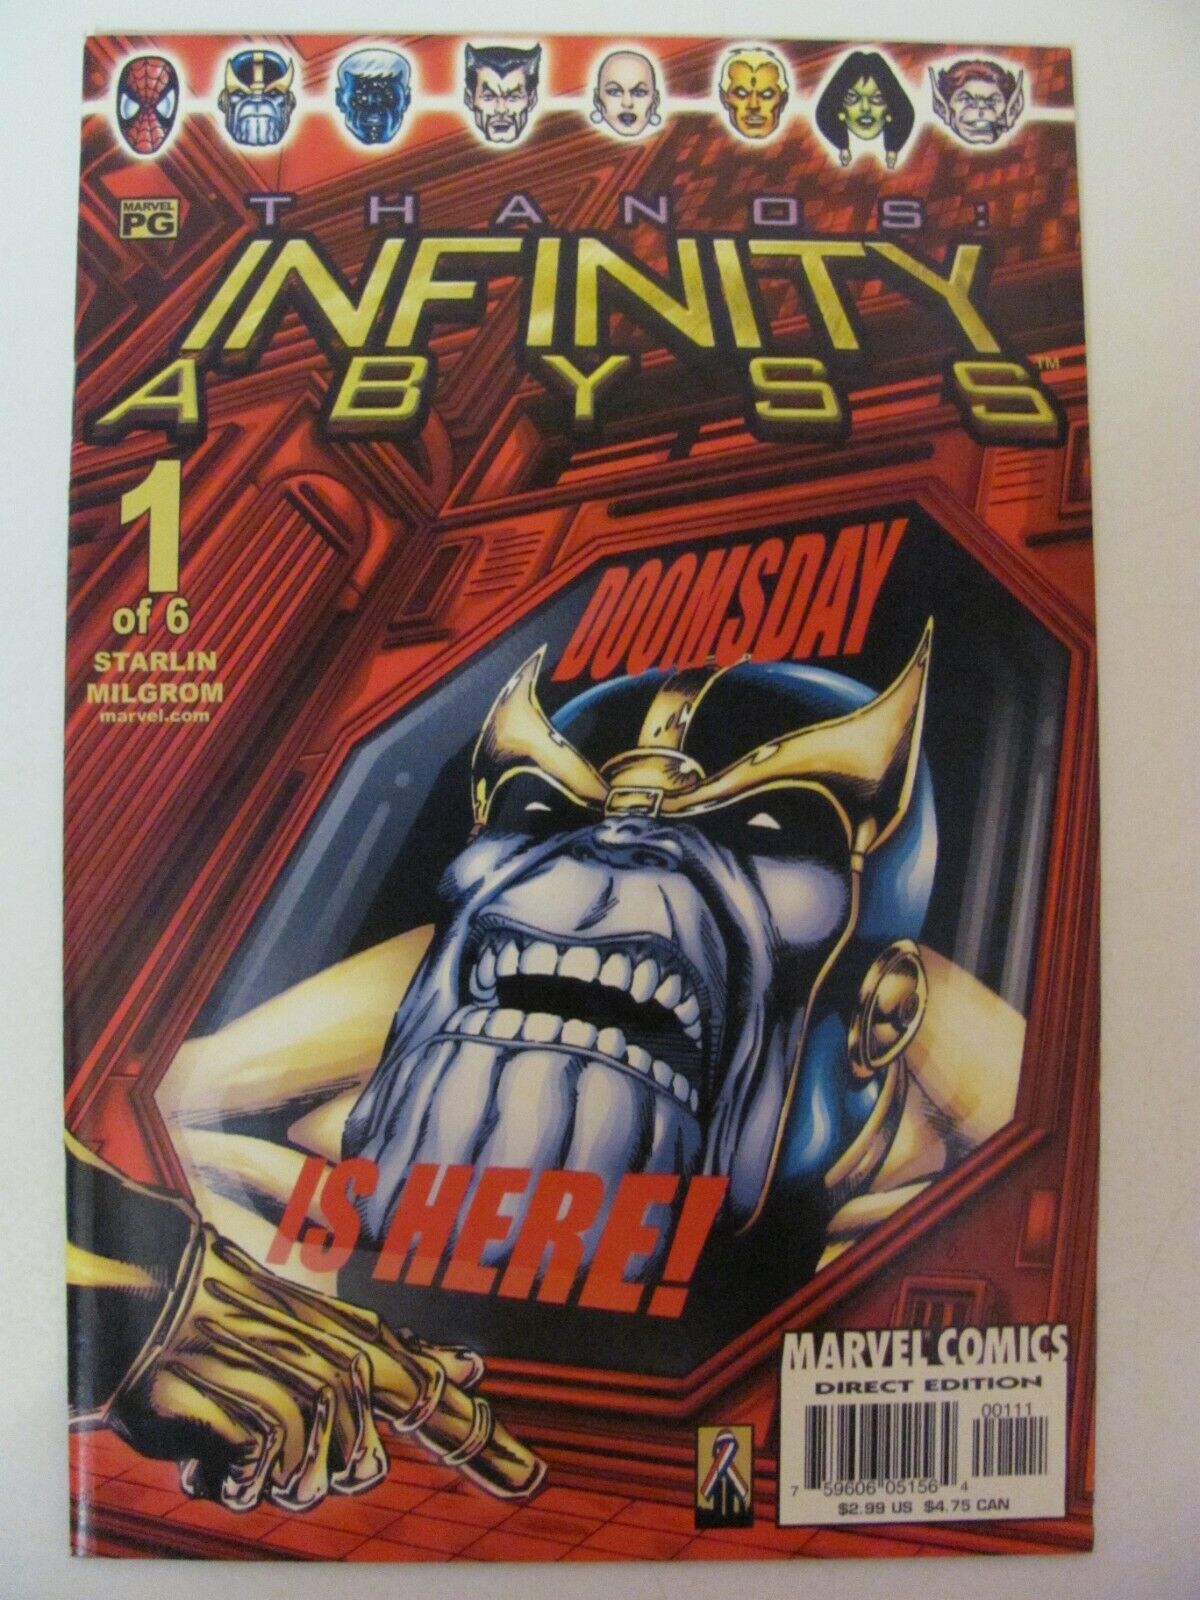 Infinity Abyss #1 2 3 4 5 6 Complete Marvel 2002 Series Thanos 9.4 Near Mint